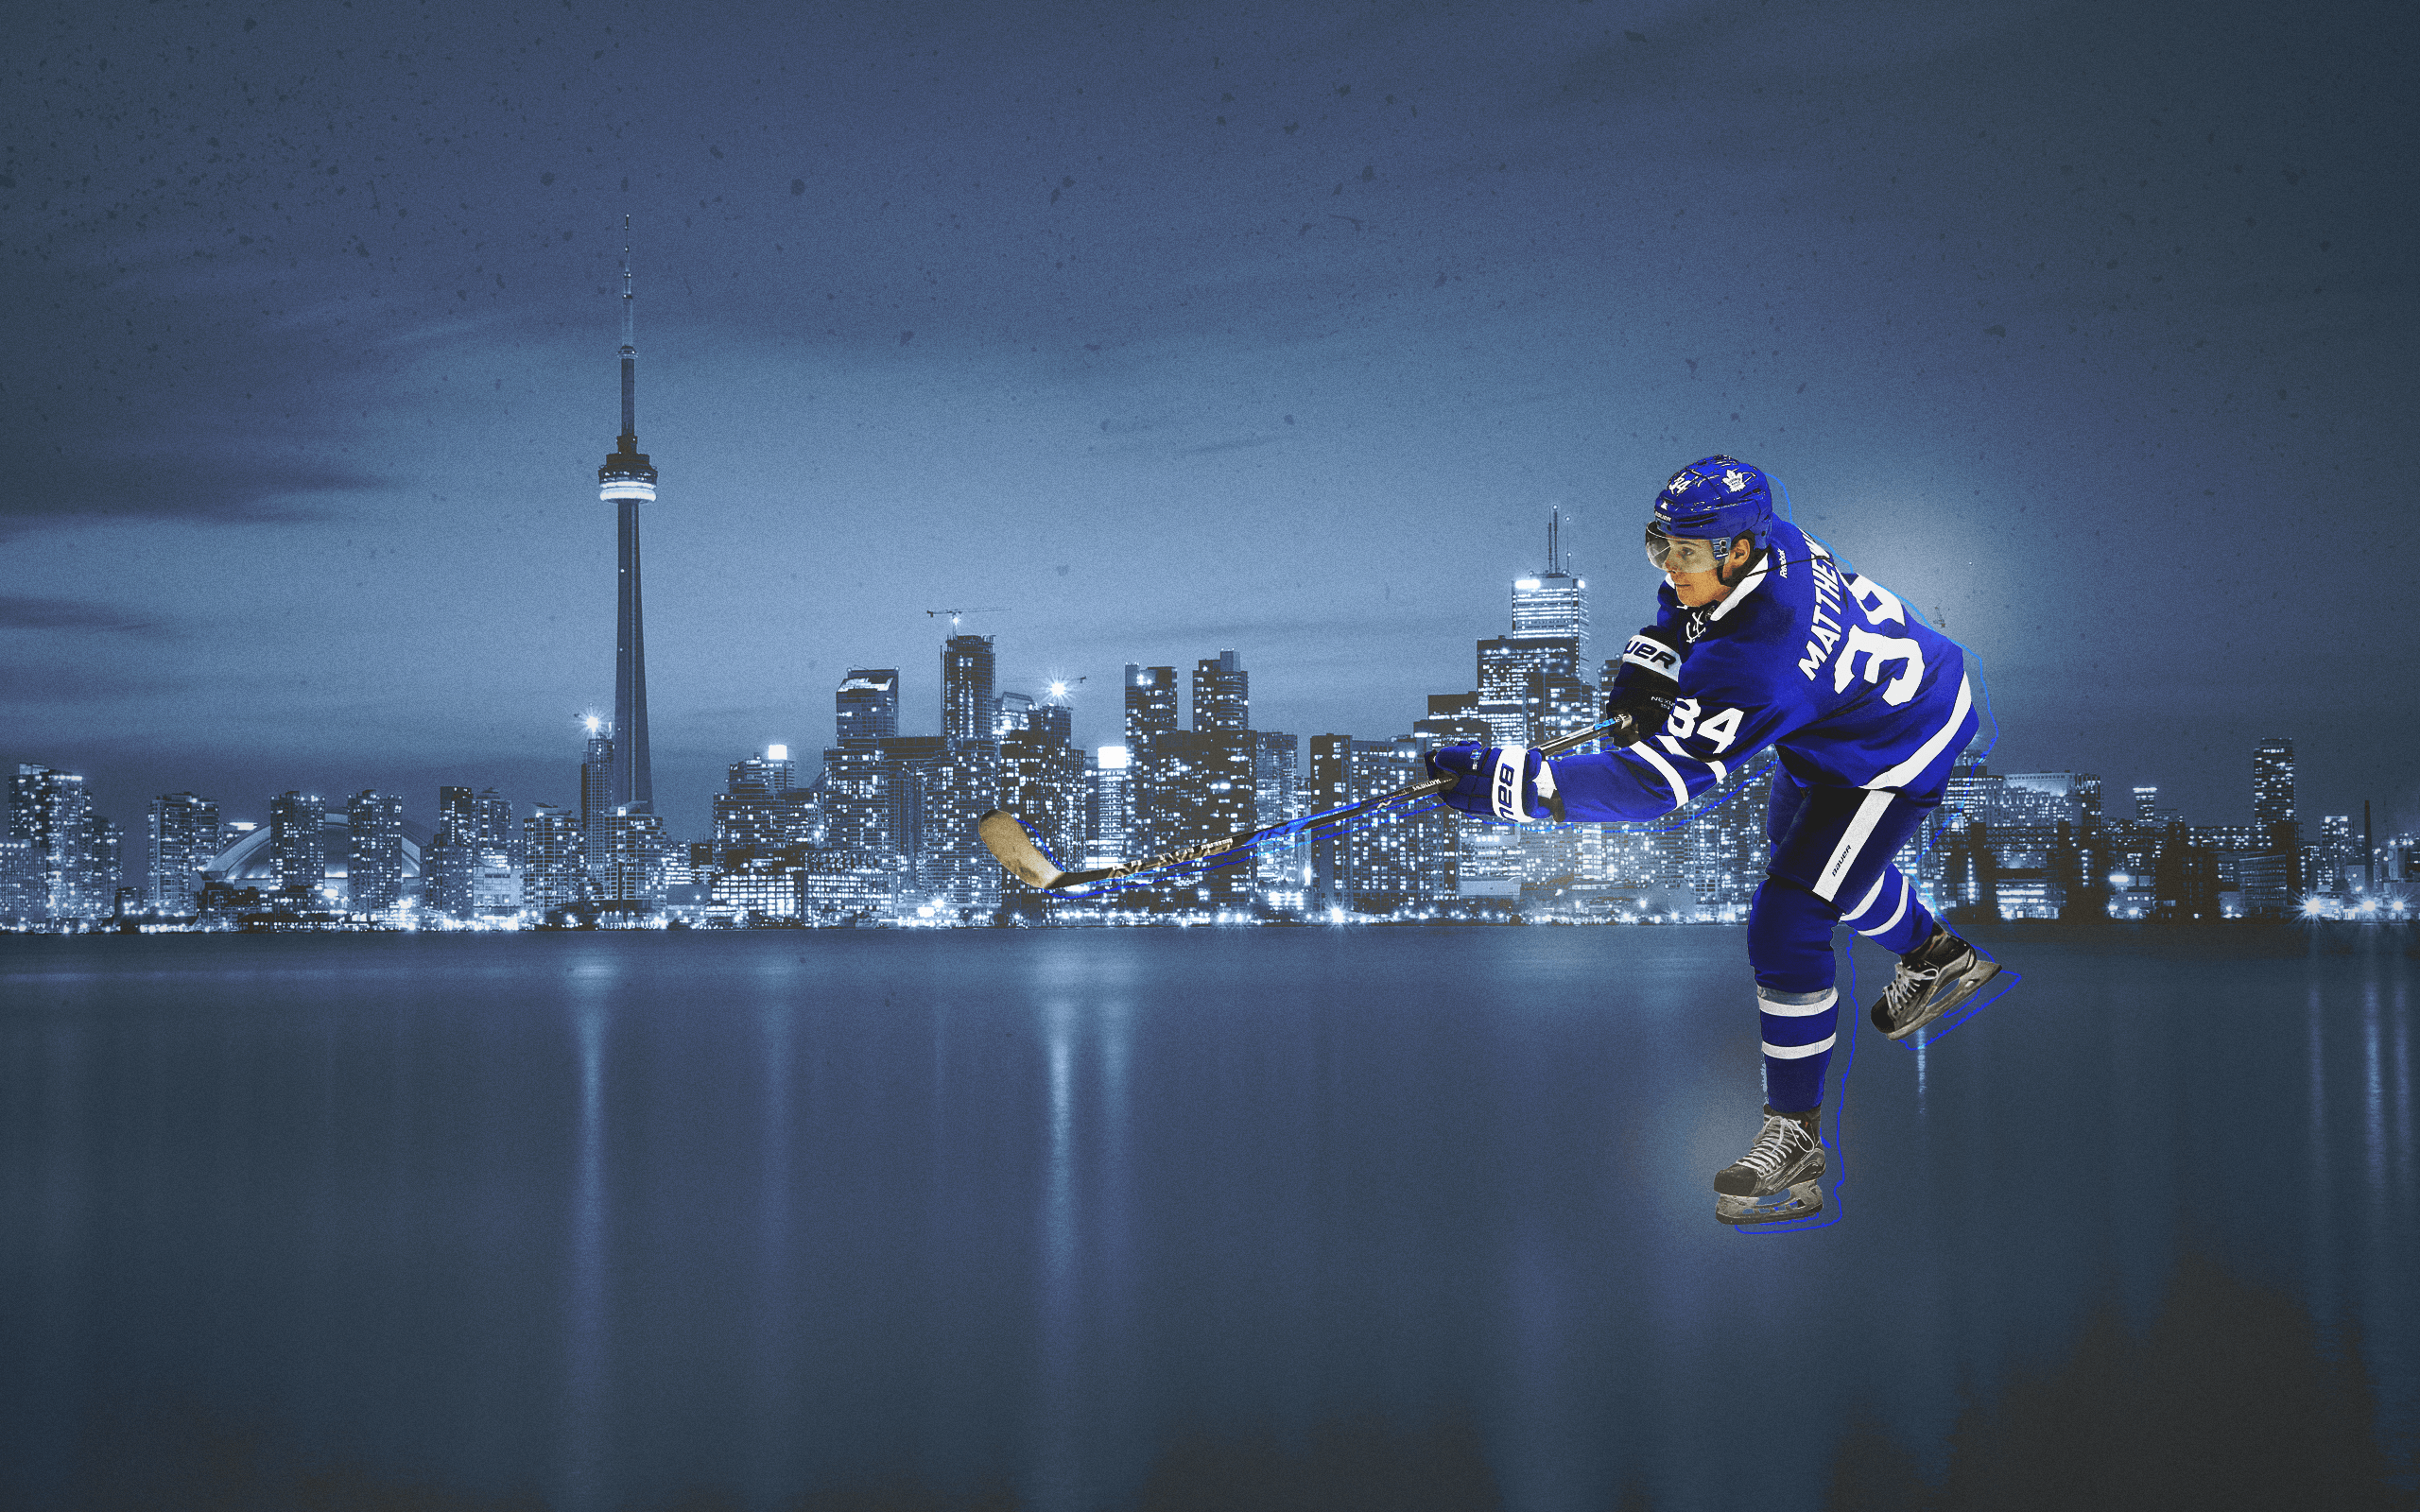 Here is a Wallpaper of Auston “Papi” Matthews : r/leafs